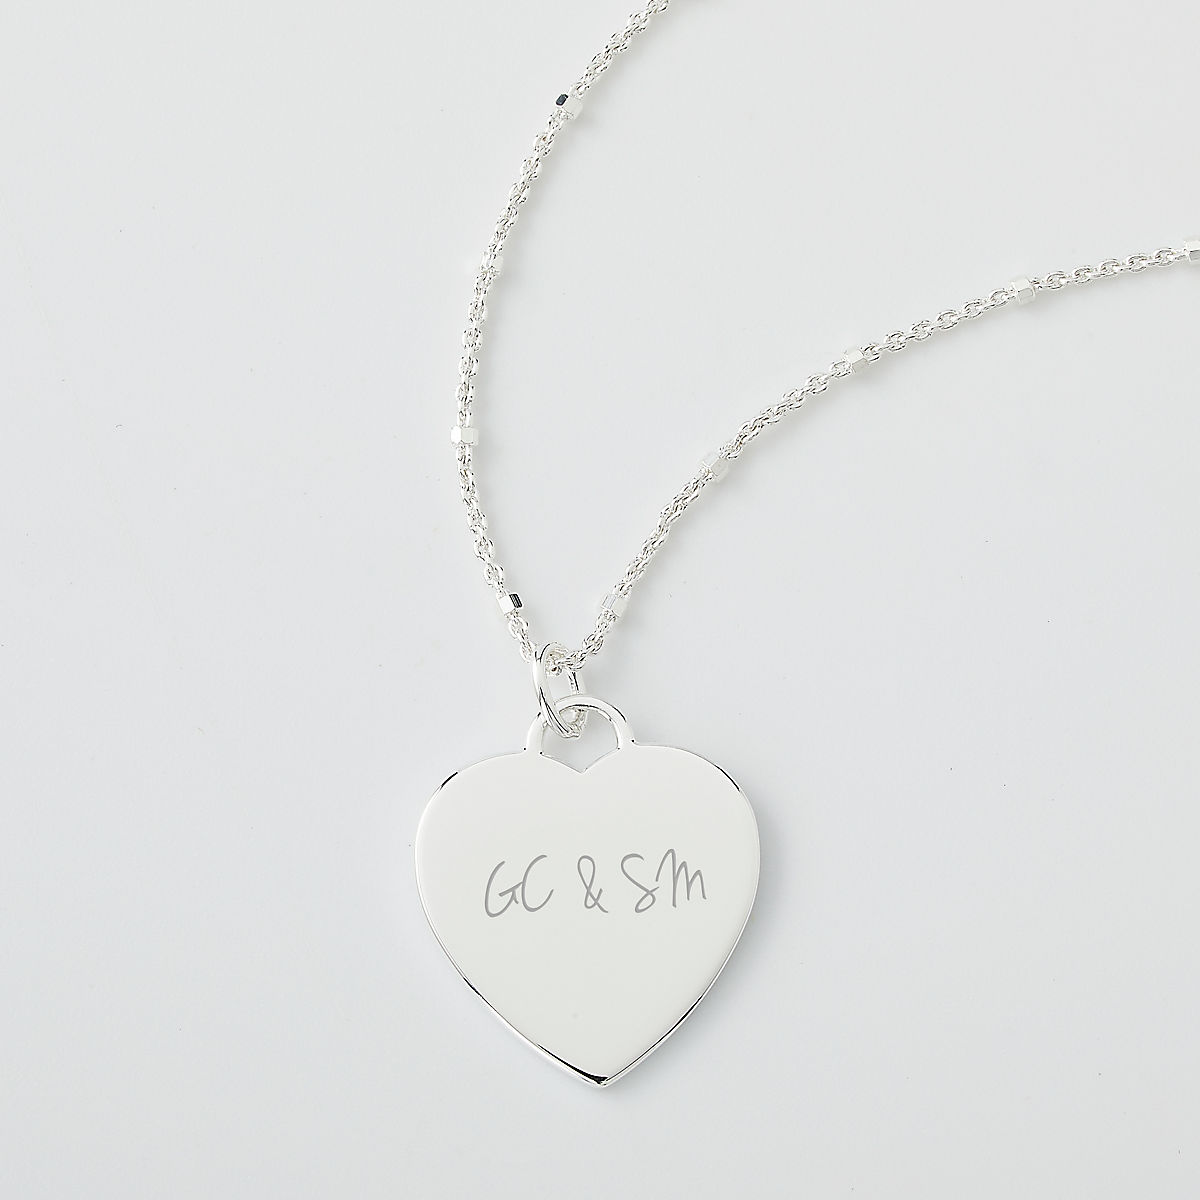 Engraved with Sterling Silver Necklace Heart Personalized Name Necklaces for people you loved